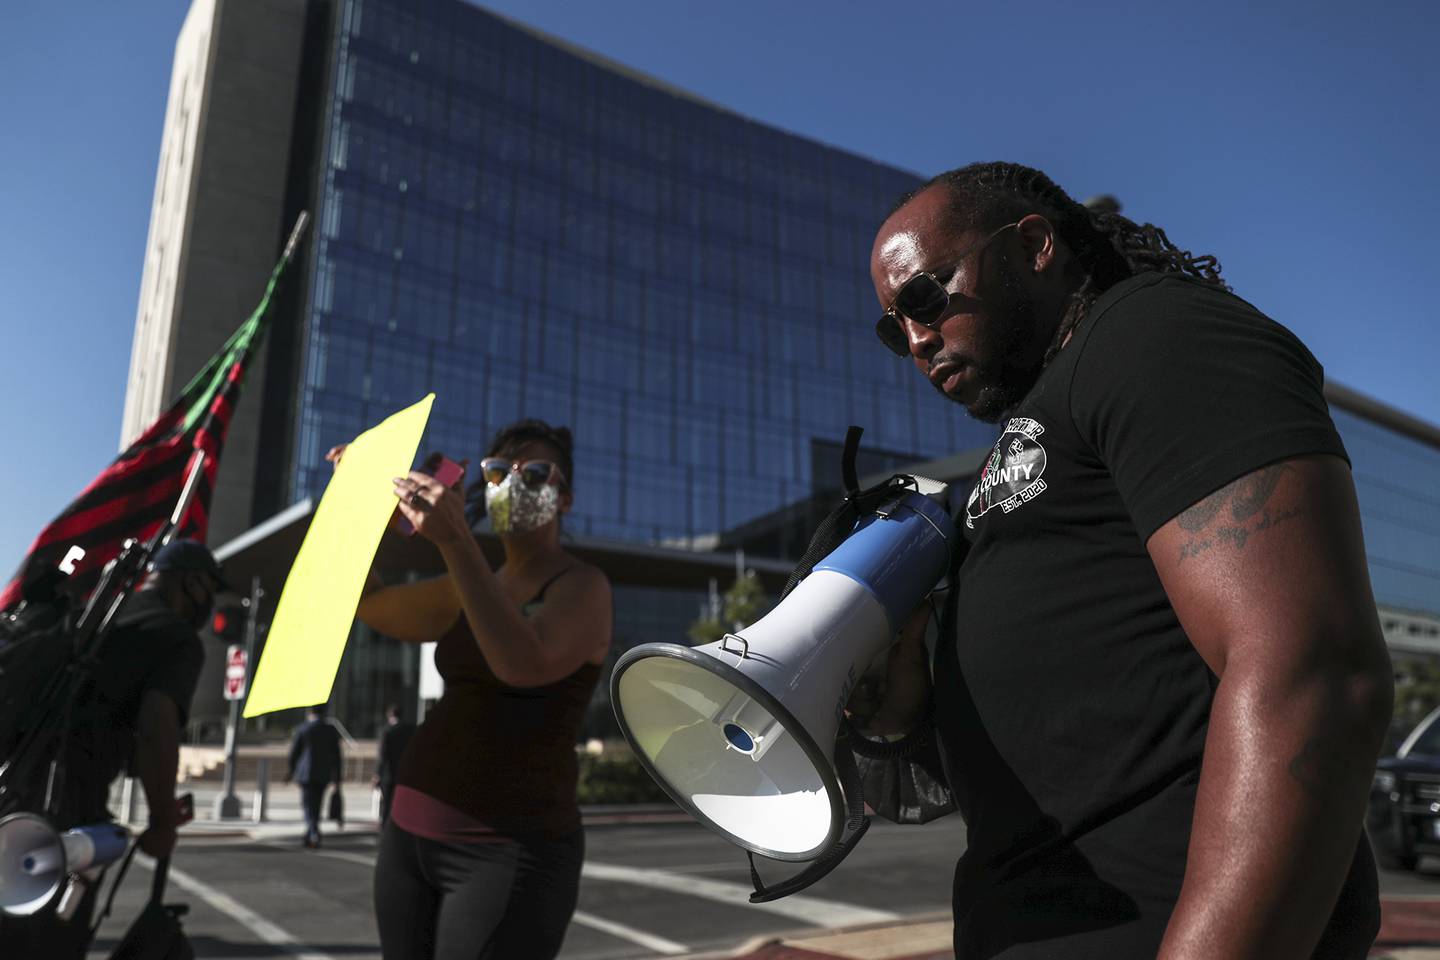 Joliet Black Lives Matter activist Karl Ferrell (right) calls for further investigation into the death of Eric Lurry, a Joliet resident who died while in police custody, on Friday, Sept. 17, 2021, outside of the District Attorney's Office in Joliet, Ill.